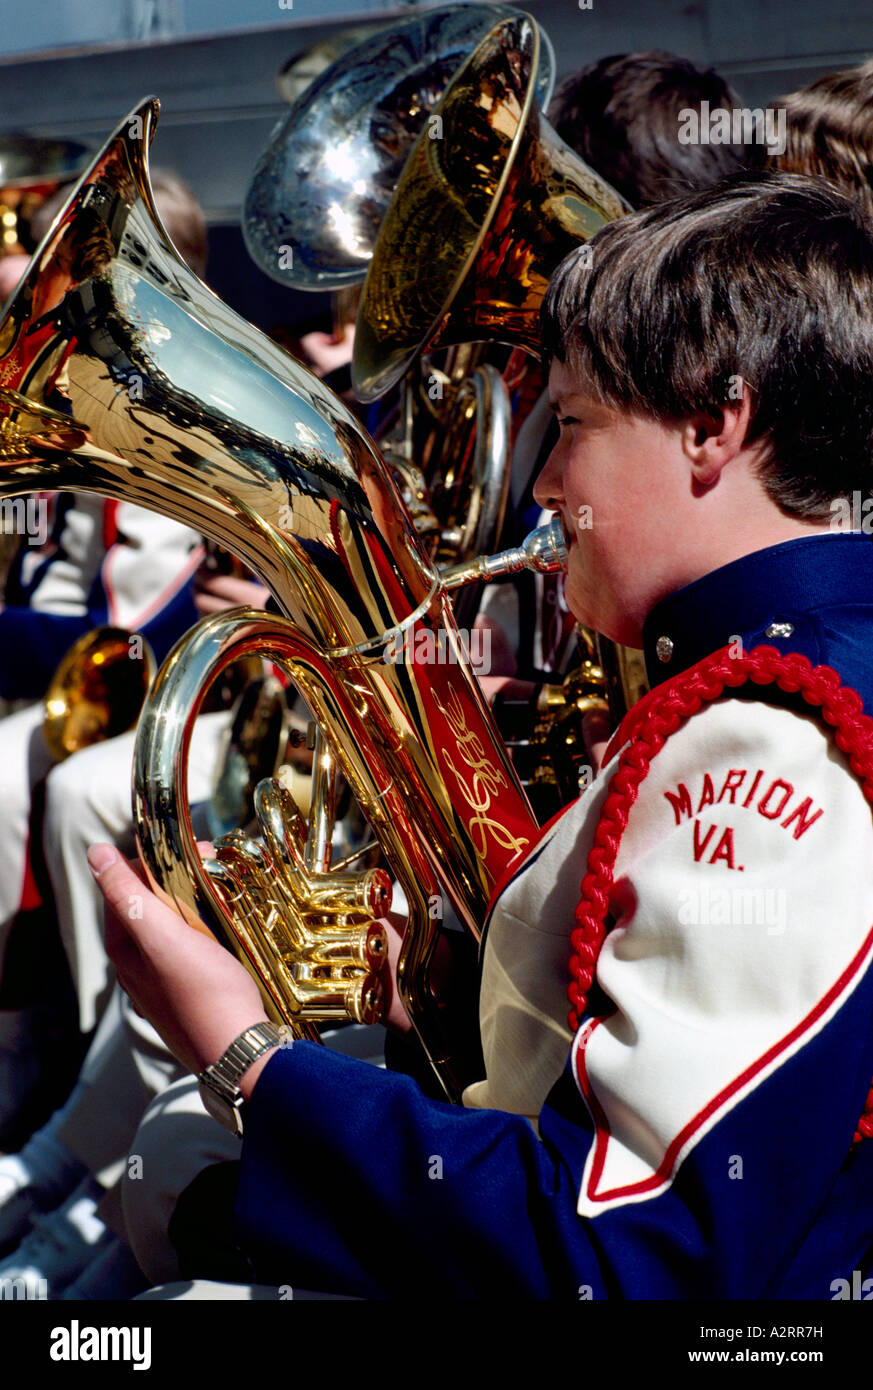 A Young Boy playing a Sousaphone or Tuba in a Marching Band Stock Photo